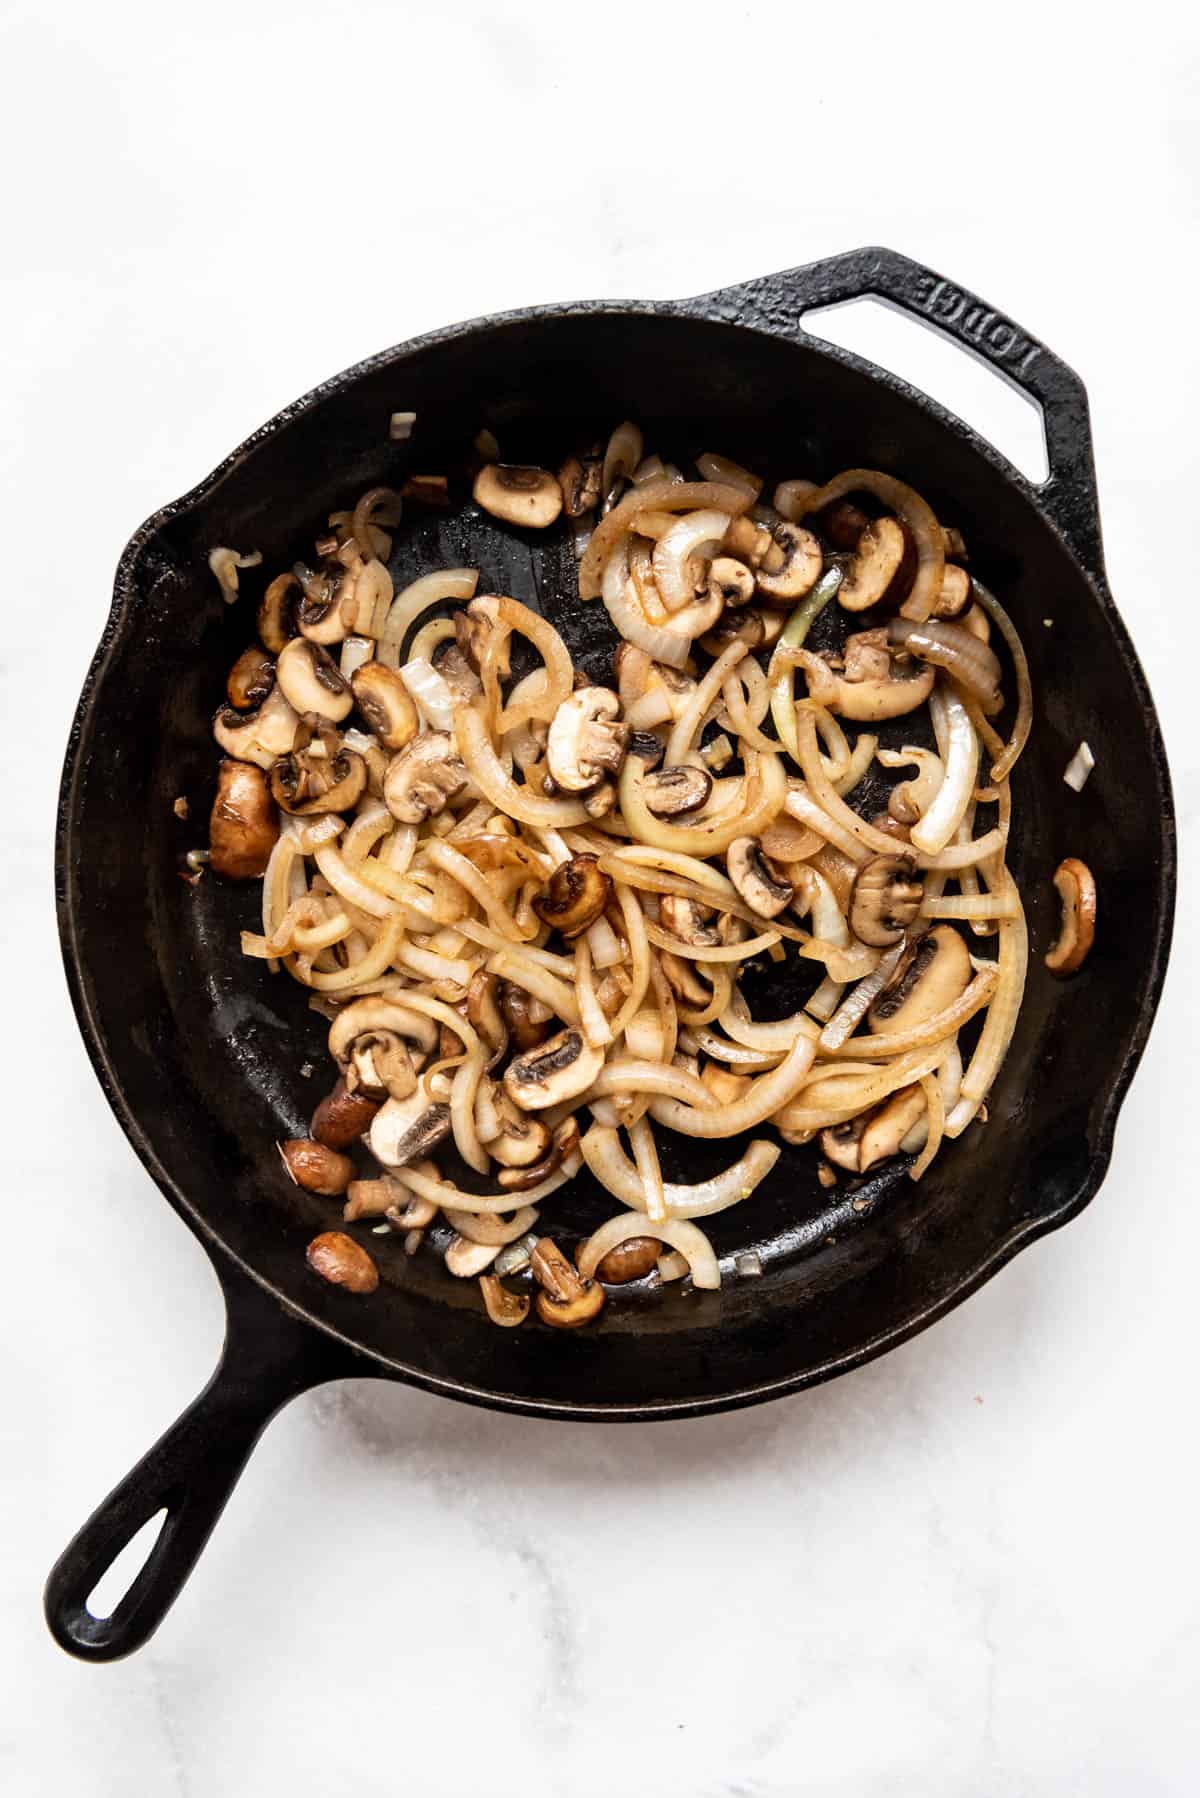 Sauteed mushrooms and onions in a large cast iron skillet.